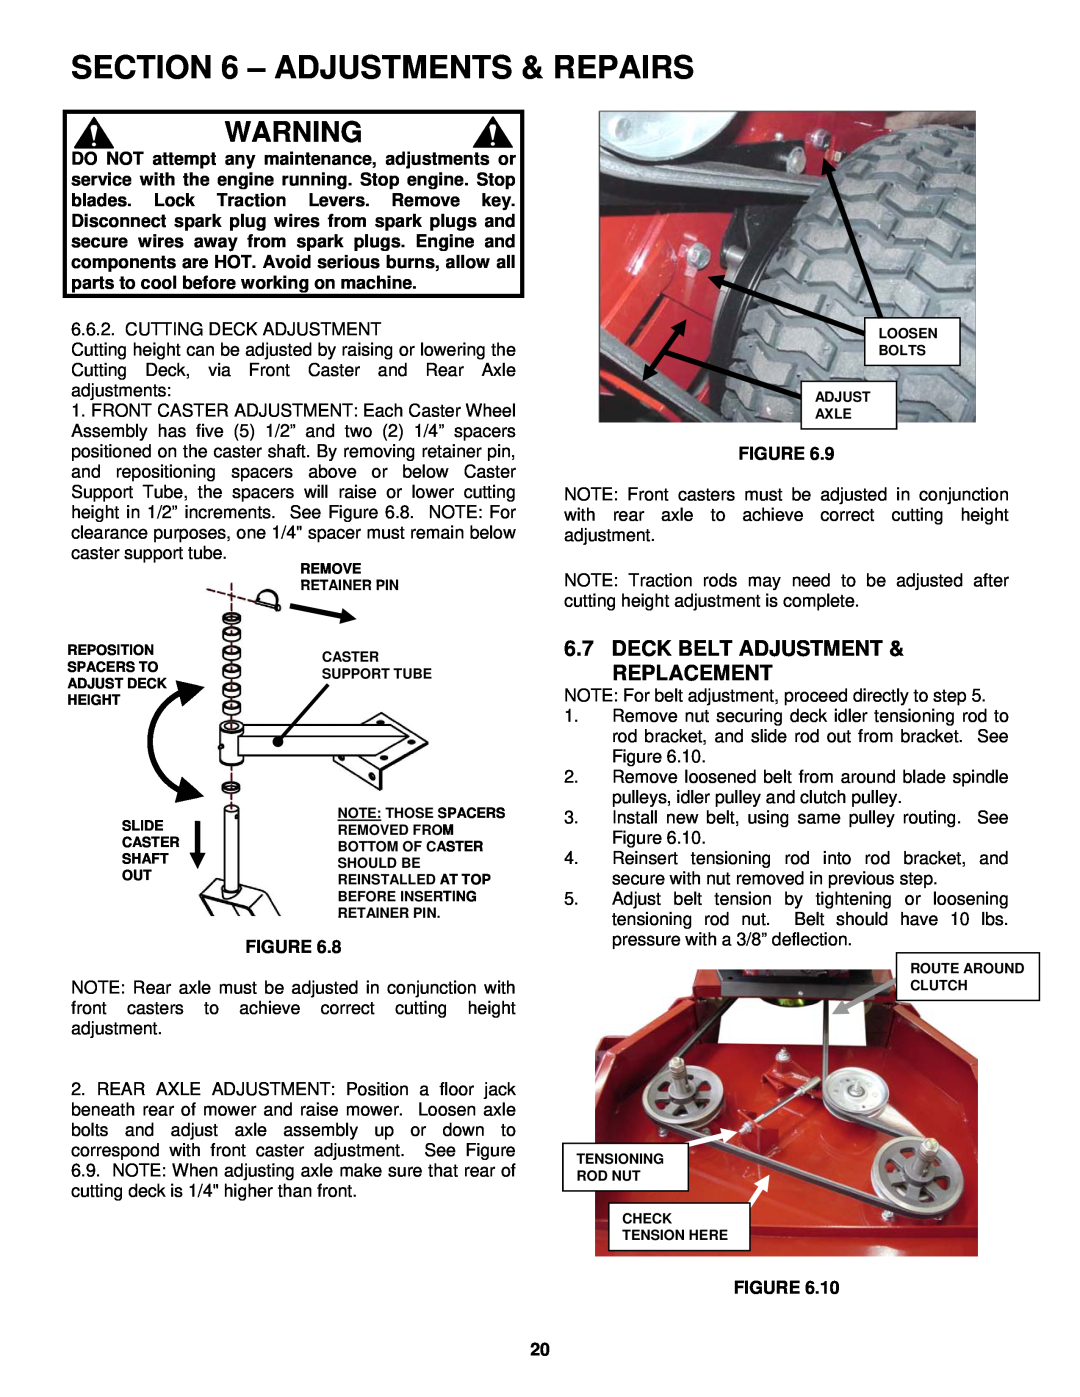 Snapper SGV13321KW important safety instructions Adjustments & Repairs, Deck Belt Adjustment & Replacement 